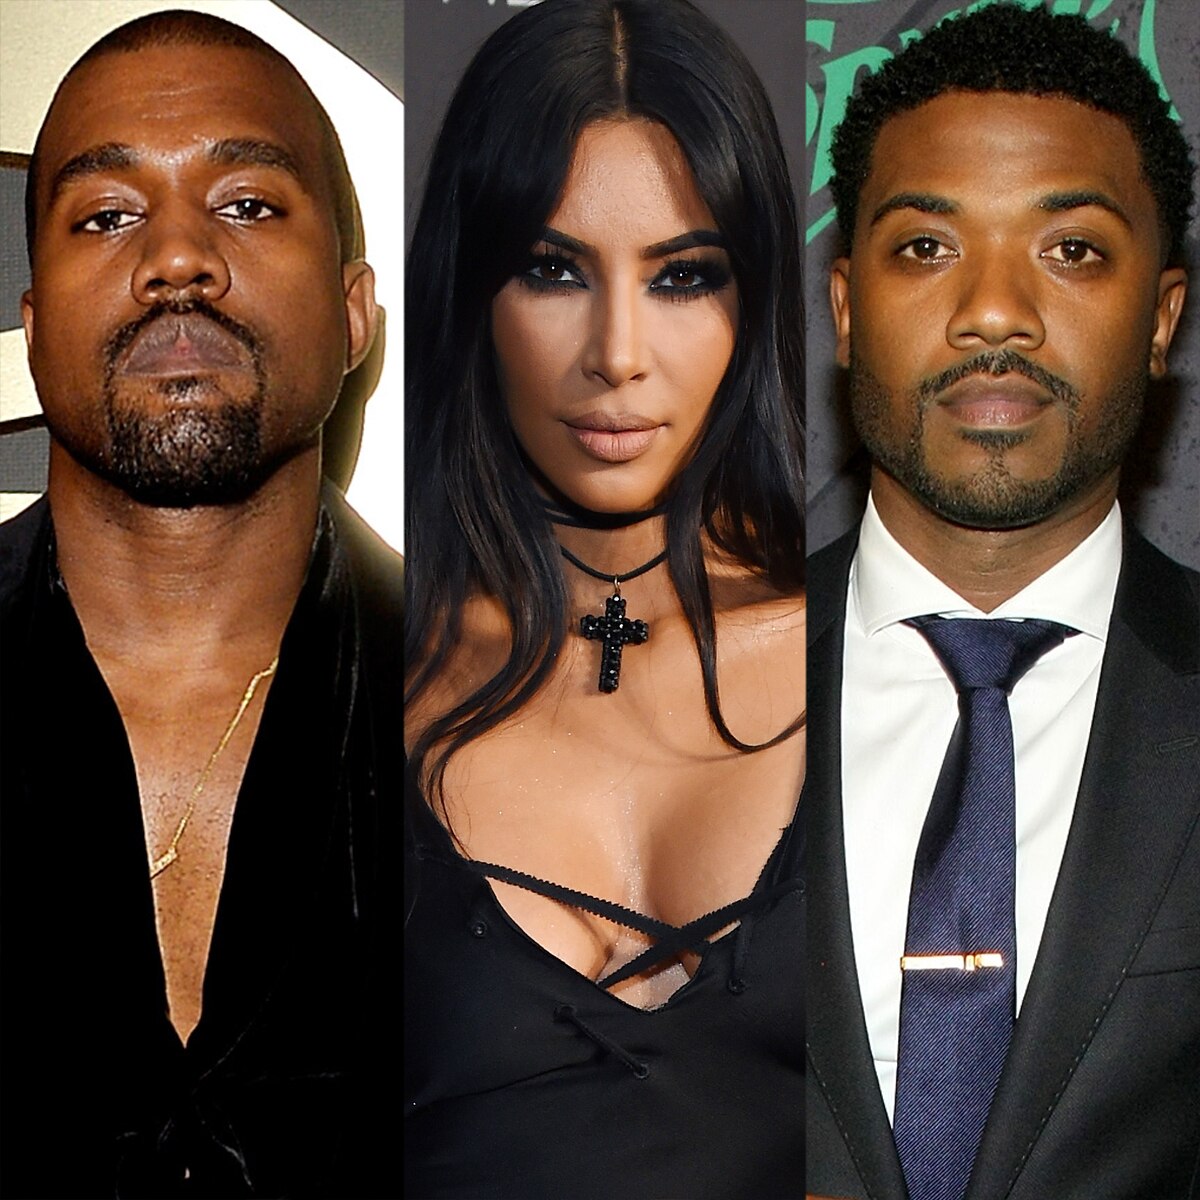 Ray J Calls Out Claim About Kanye Giving Sex Tape to Kim Kardashian